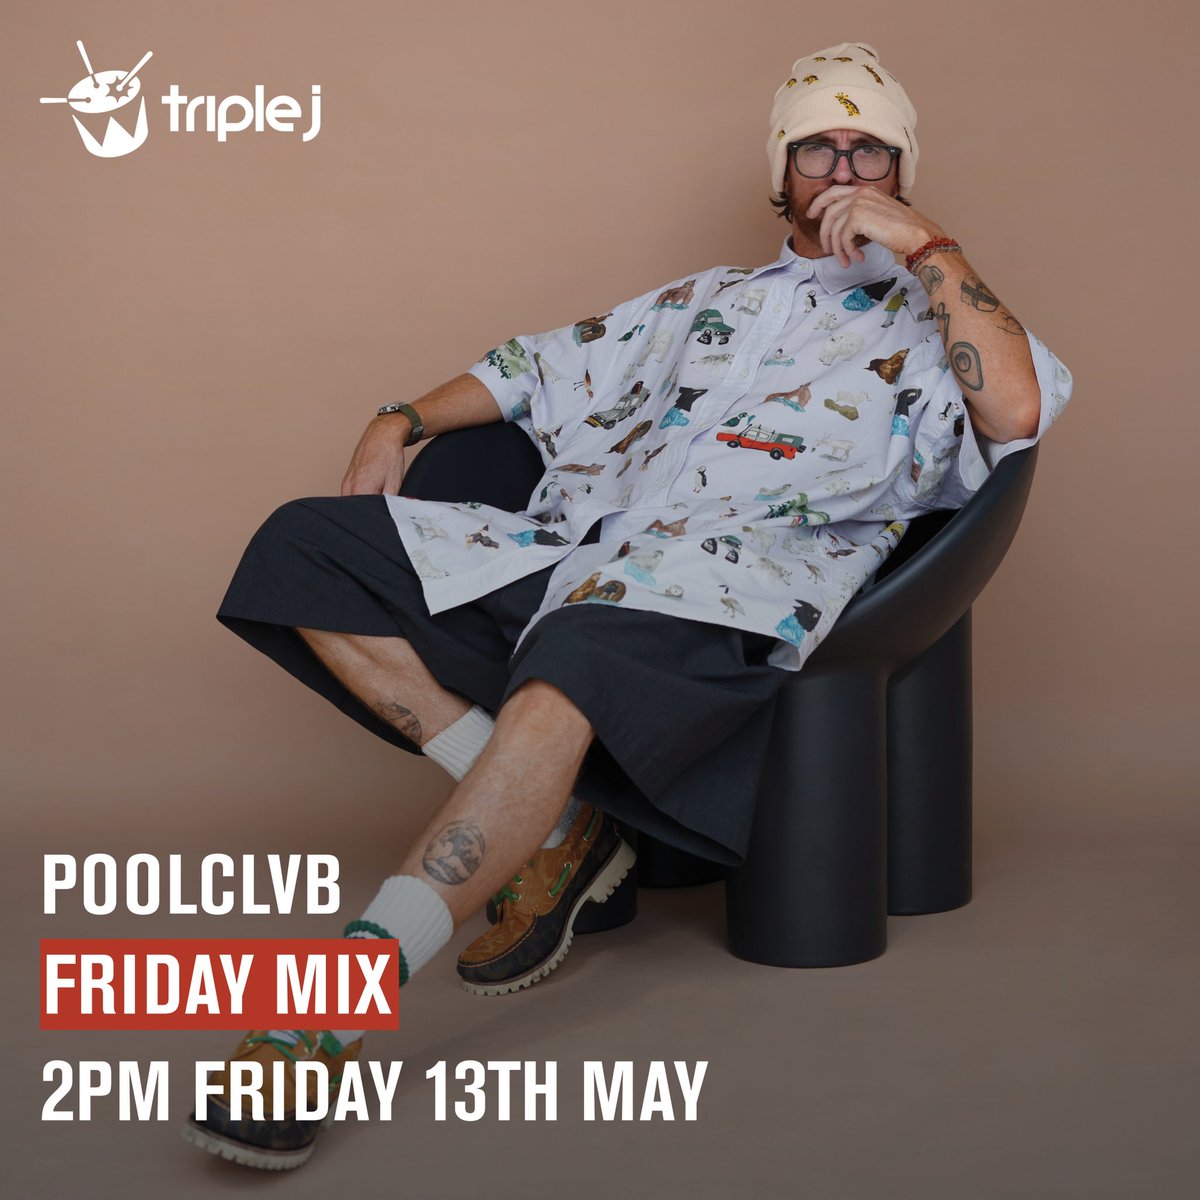 Guess who’s taking over the @triplej Friday Mix 🥹 Tune in at 2pm! Im having chat with @daveawoodhead then getting up to some mischief for an exclusive mix 🥁❤️📻